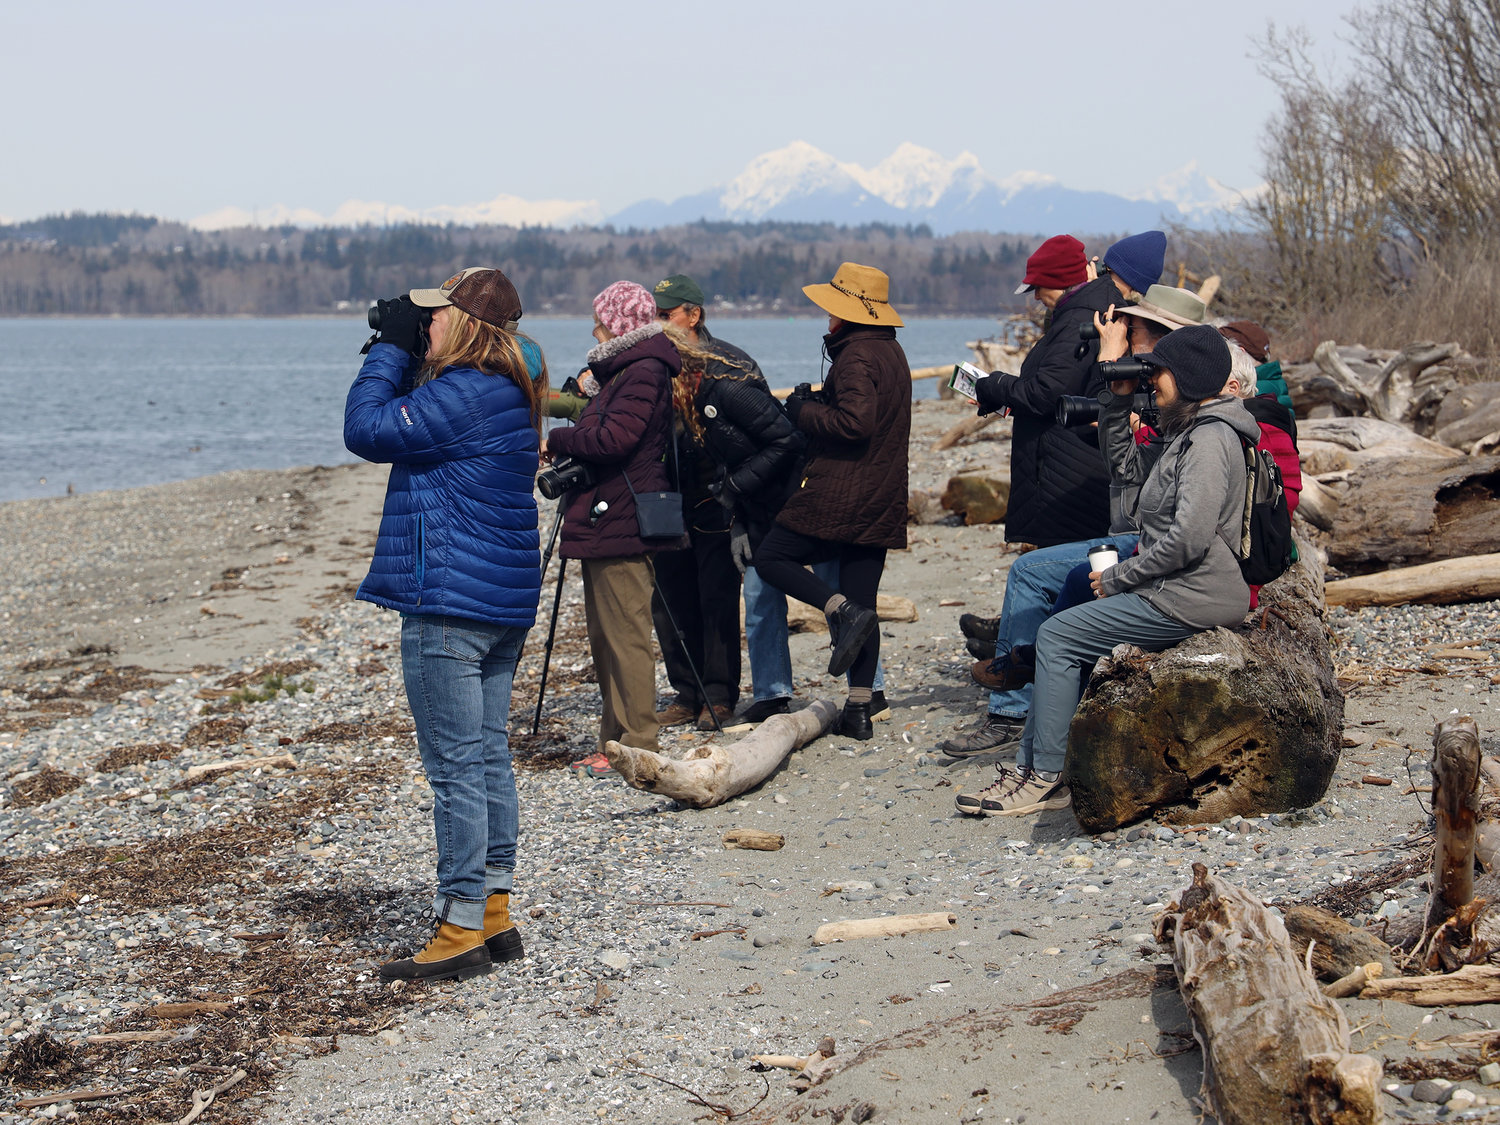 People watch for birds during the 20th annual Wings Over Water Northwest Birding Festival that took place March 17-19 in Blaine, Birch Bay and Semiahmoo.